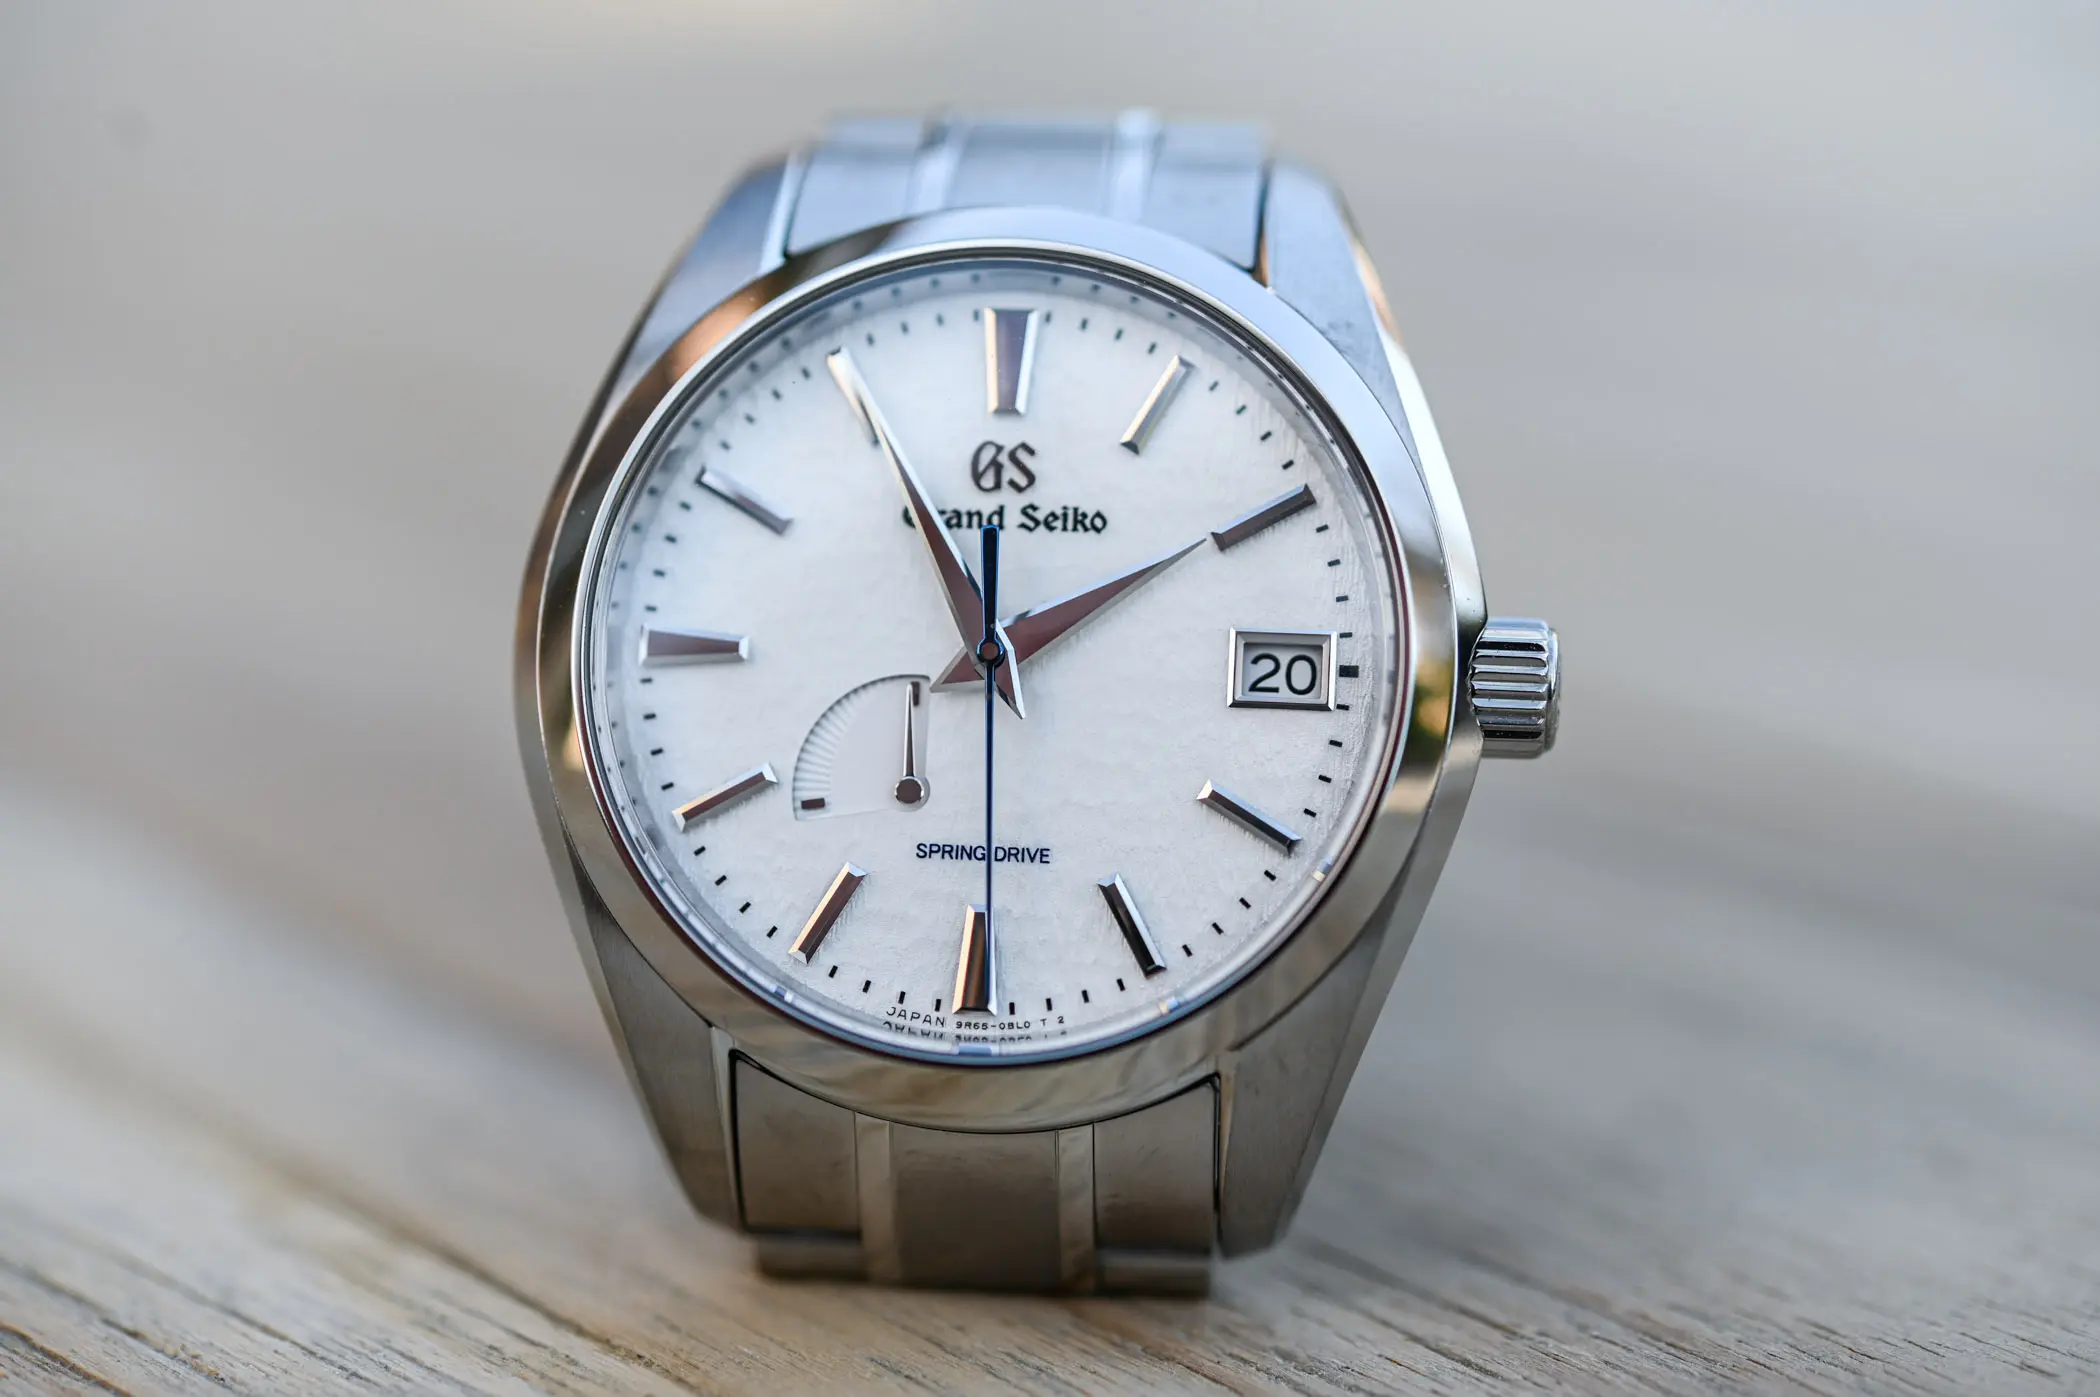 Grand Seiko Overview: A Brand Worth Considering - The Modest Man